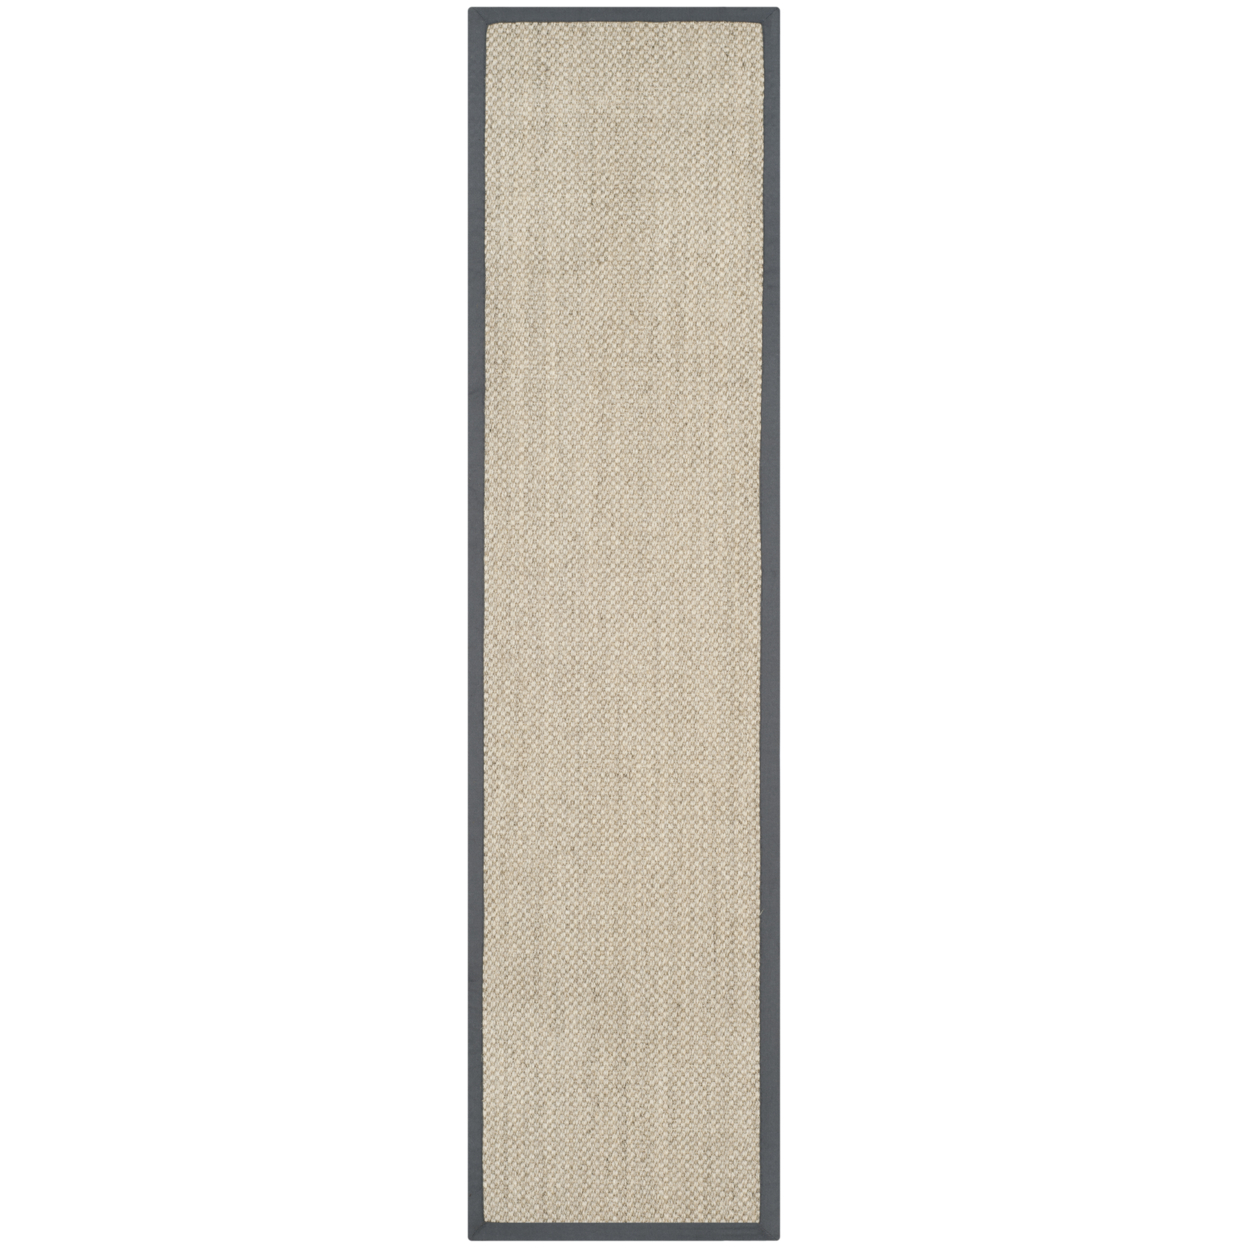 SAFAVIEH Natural Fiber Collection NF443B Marble/Grey Rug - 2' 6 X 12'